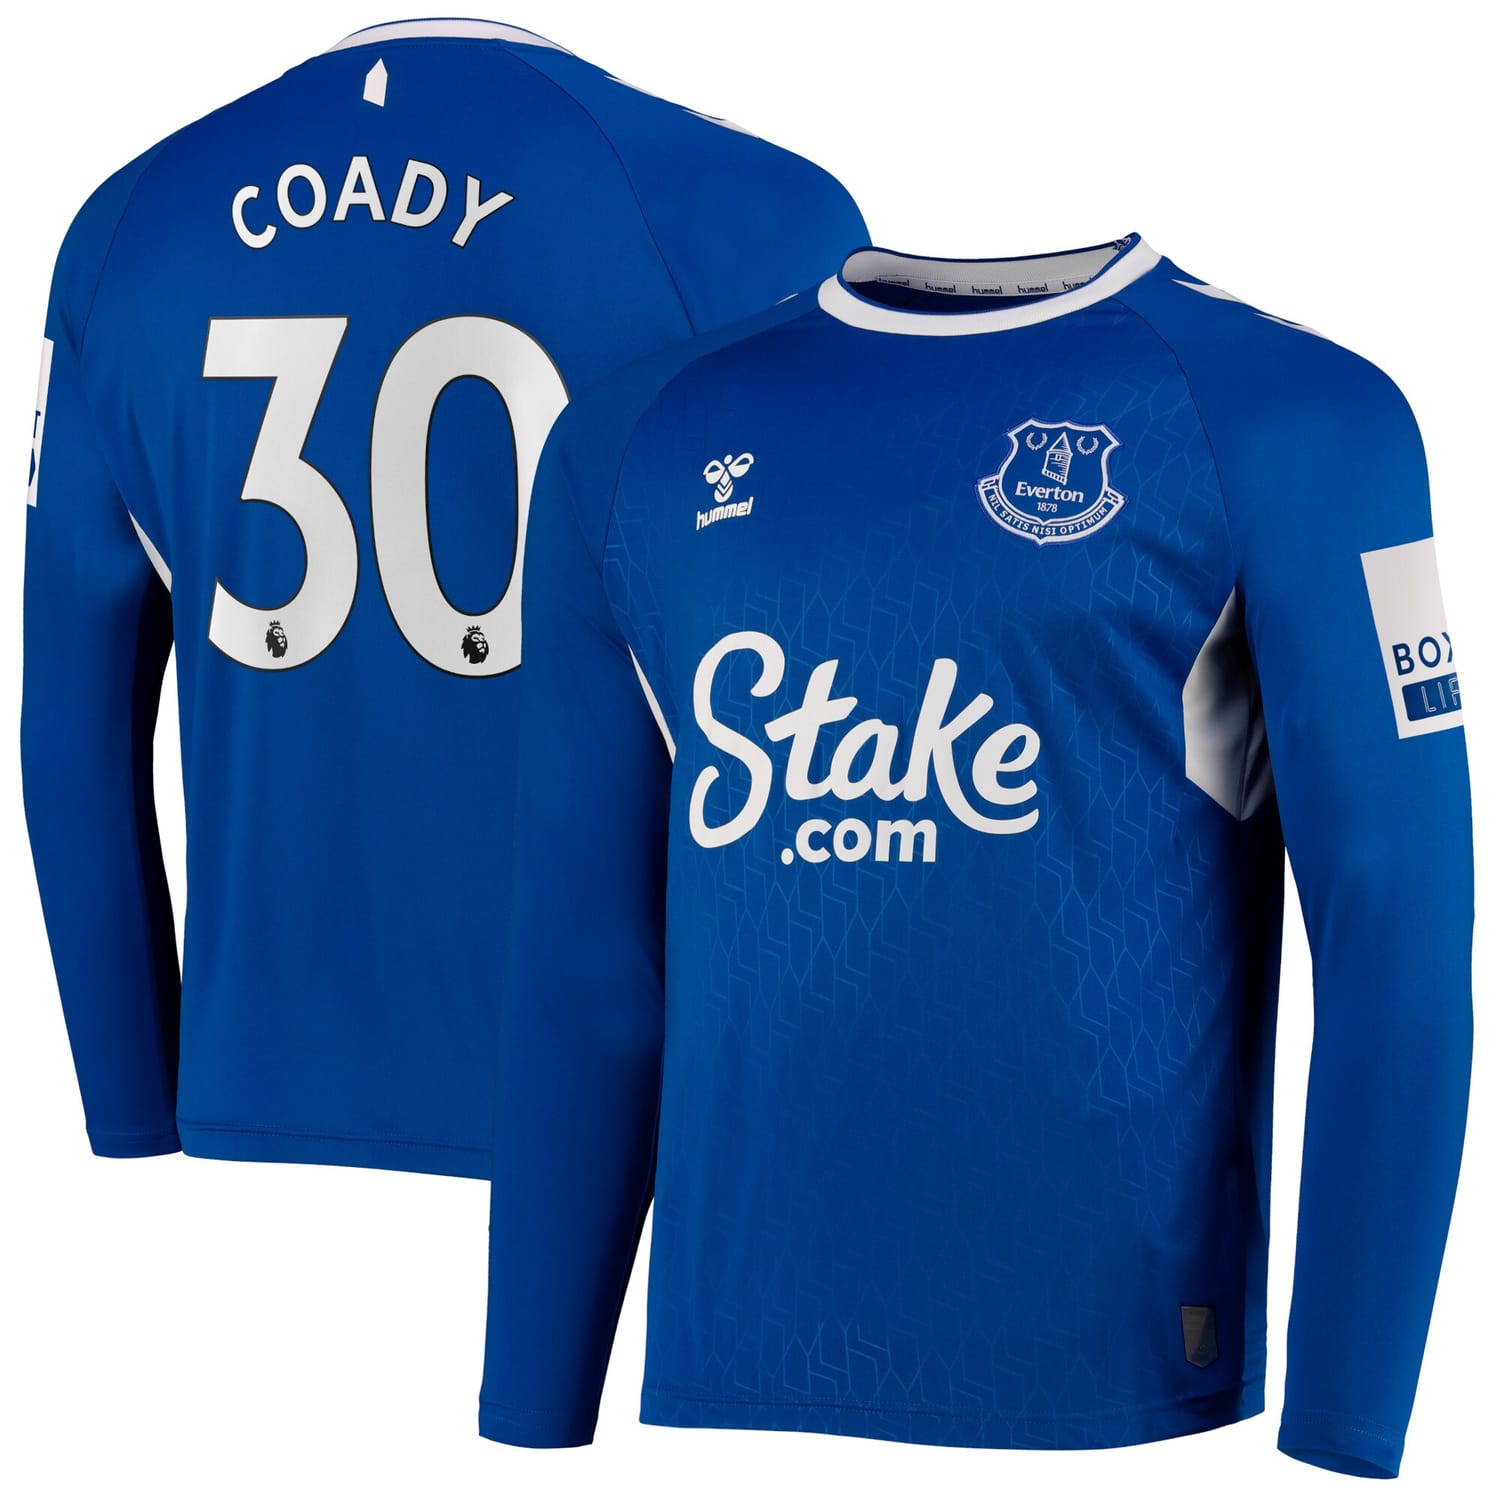 Premier League Everton Home Jersey Shirt Long Sleeve 2022-23 player Conor Coady 30 printing for Men